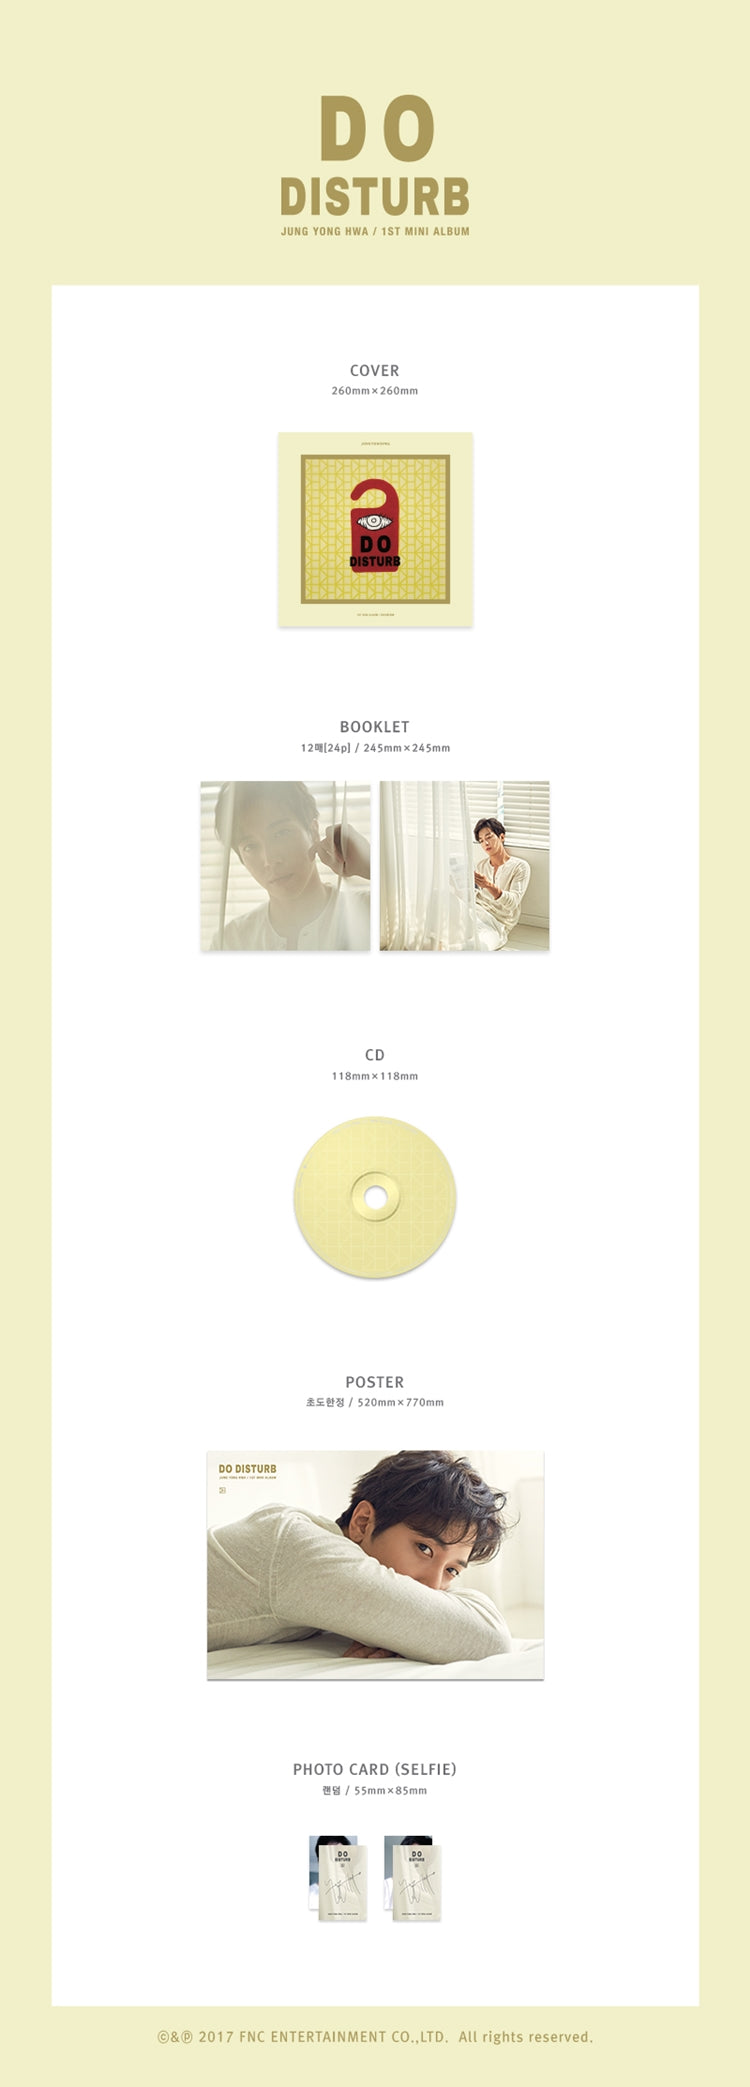 1 CD
1 Booklet
1 Photo Card